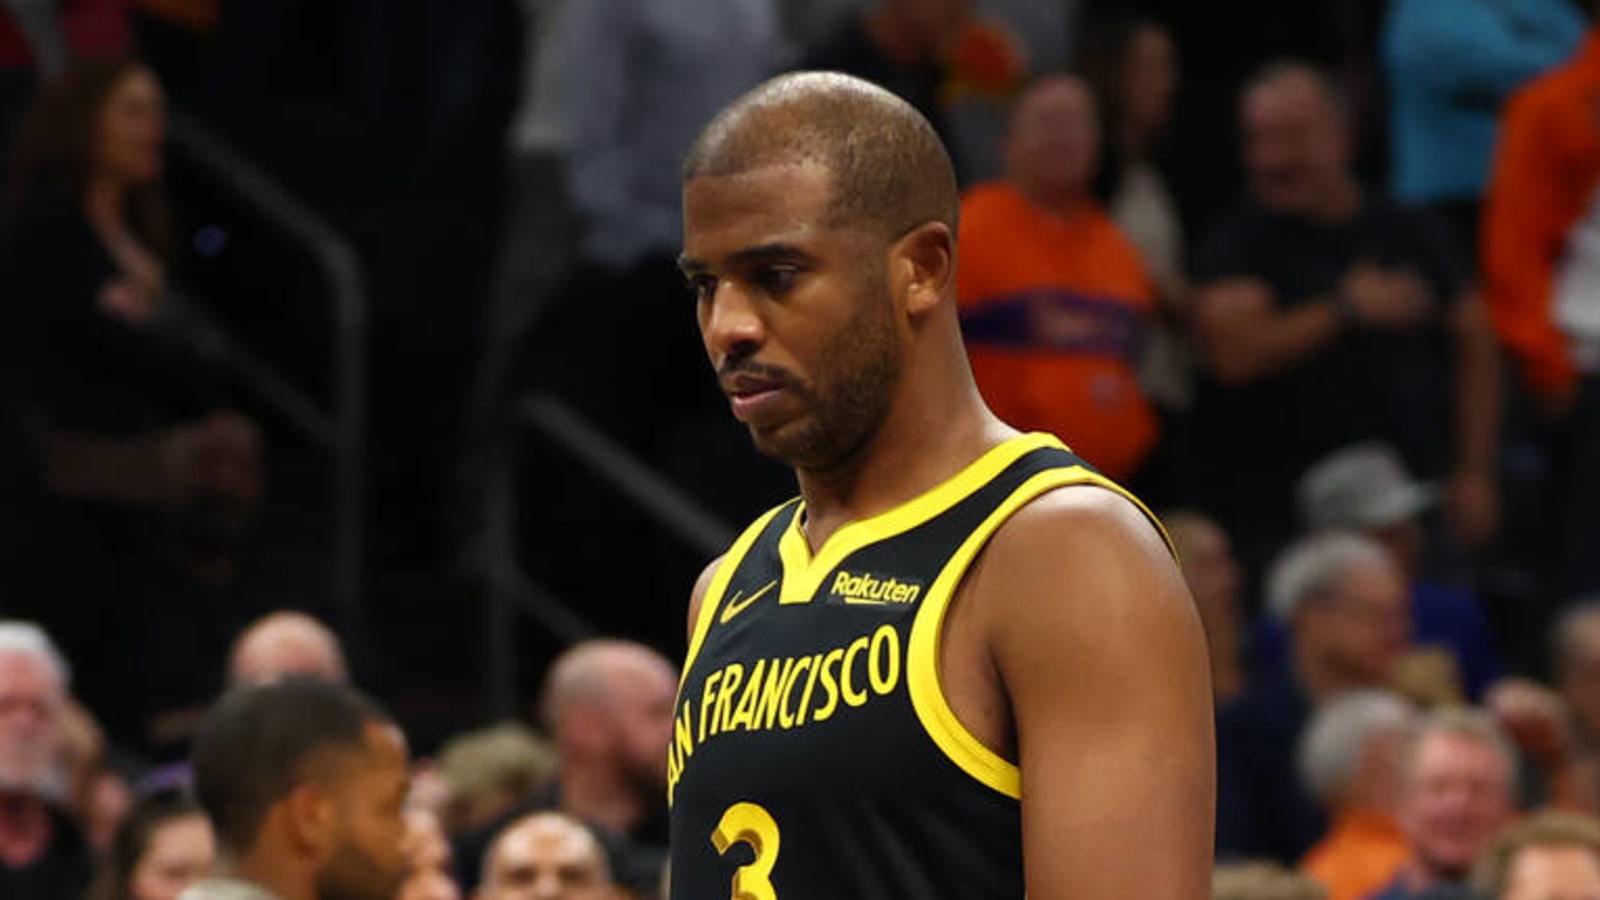 Chris Paul after ejection: “It’s personal” with the ref